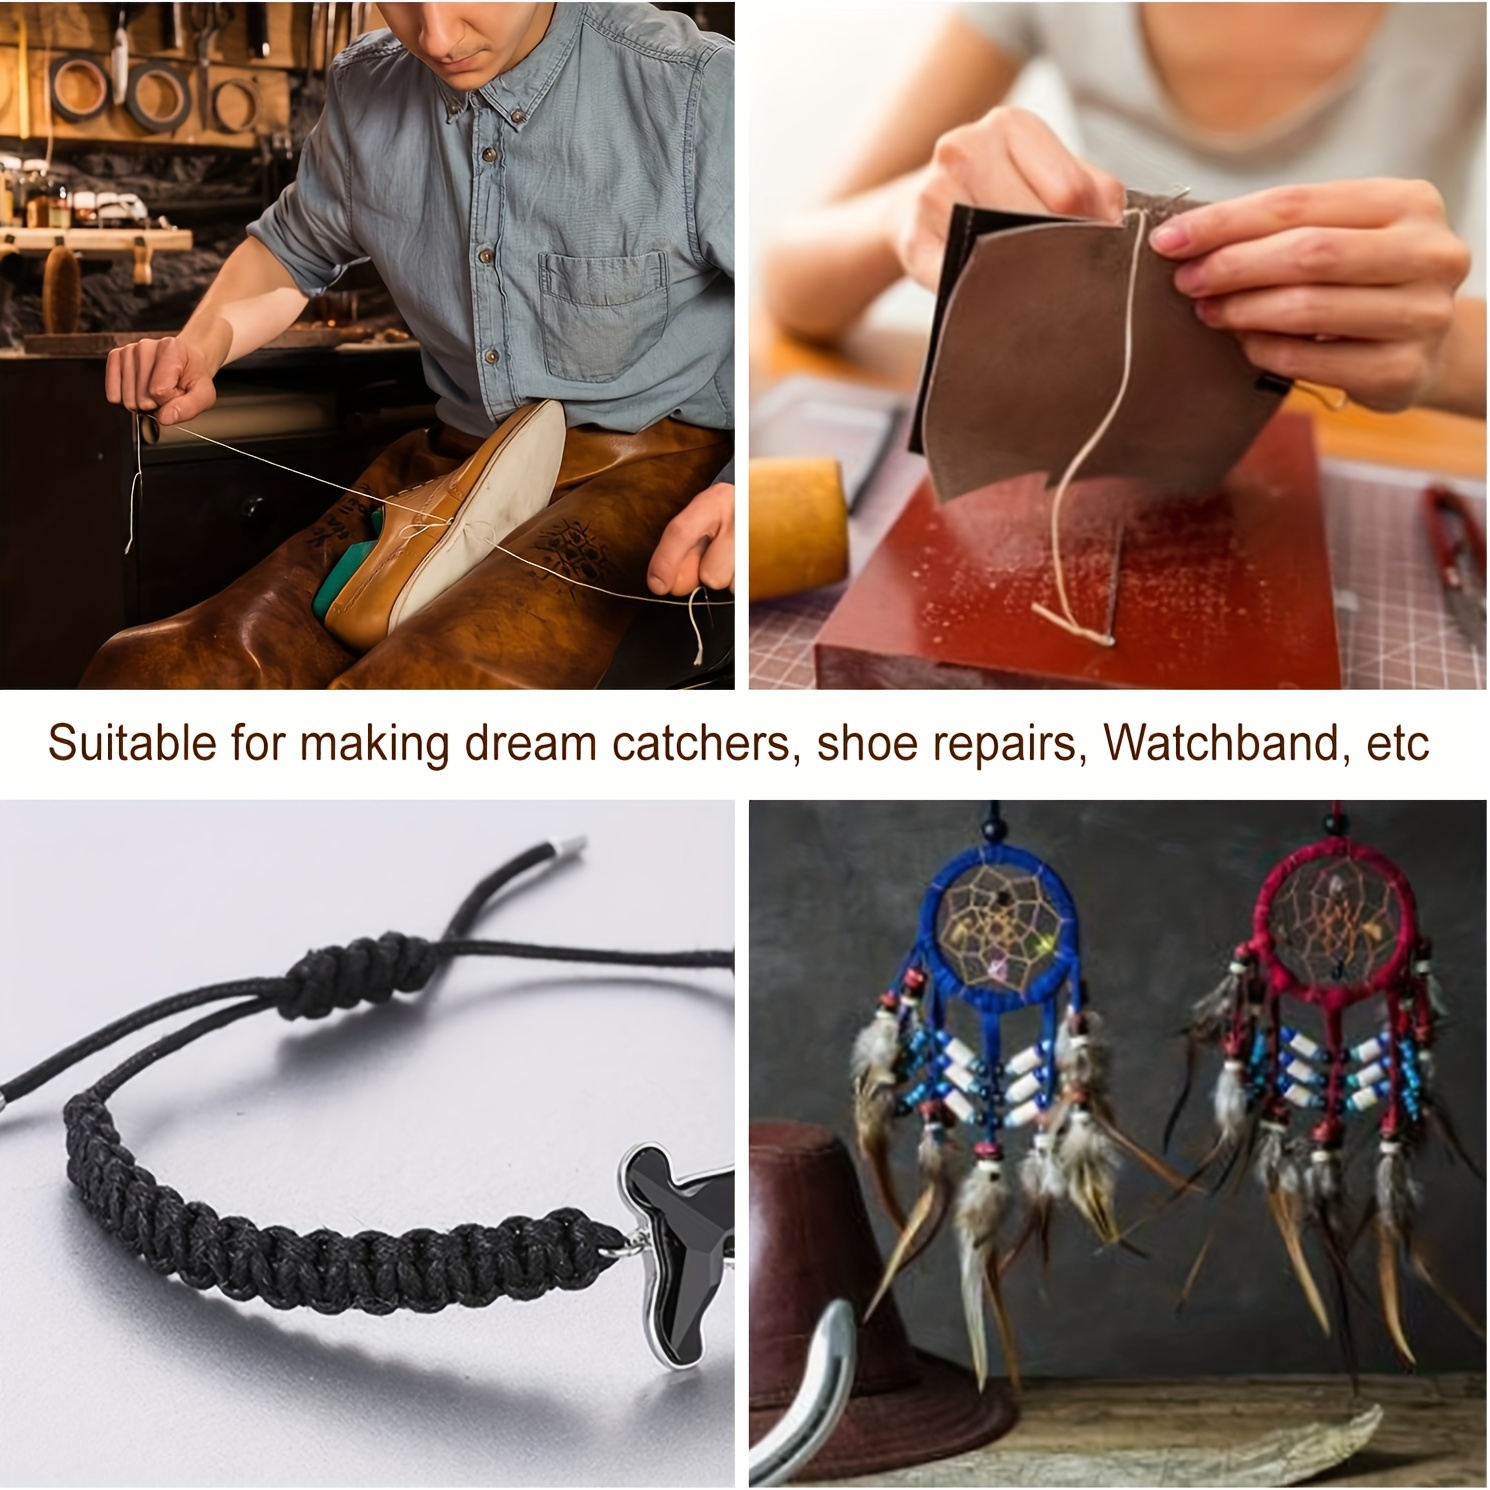 Leather Sewing With 12 Colors Of Wax Thread Each Size 55 And